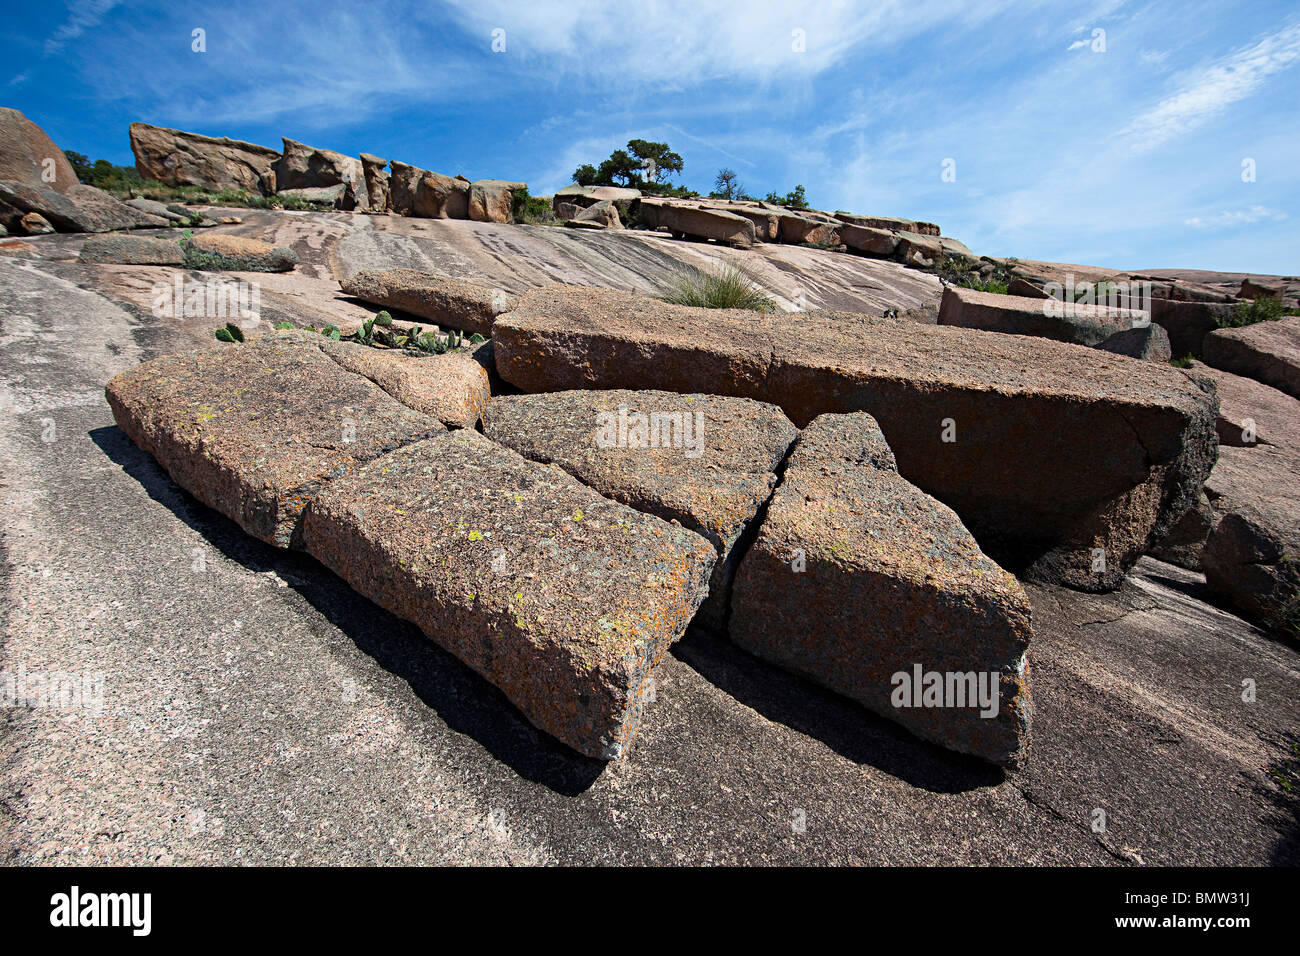 Granite rock formations Enchanted Rock State Natural Area Texas USA Stock Photo